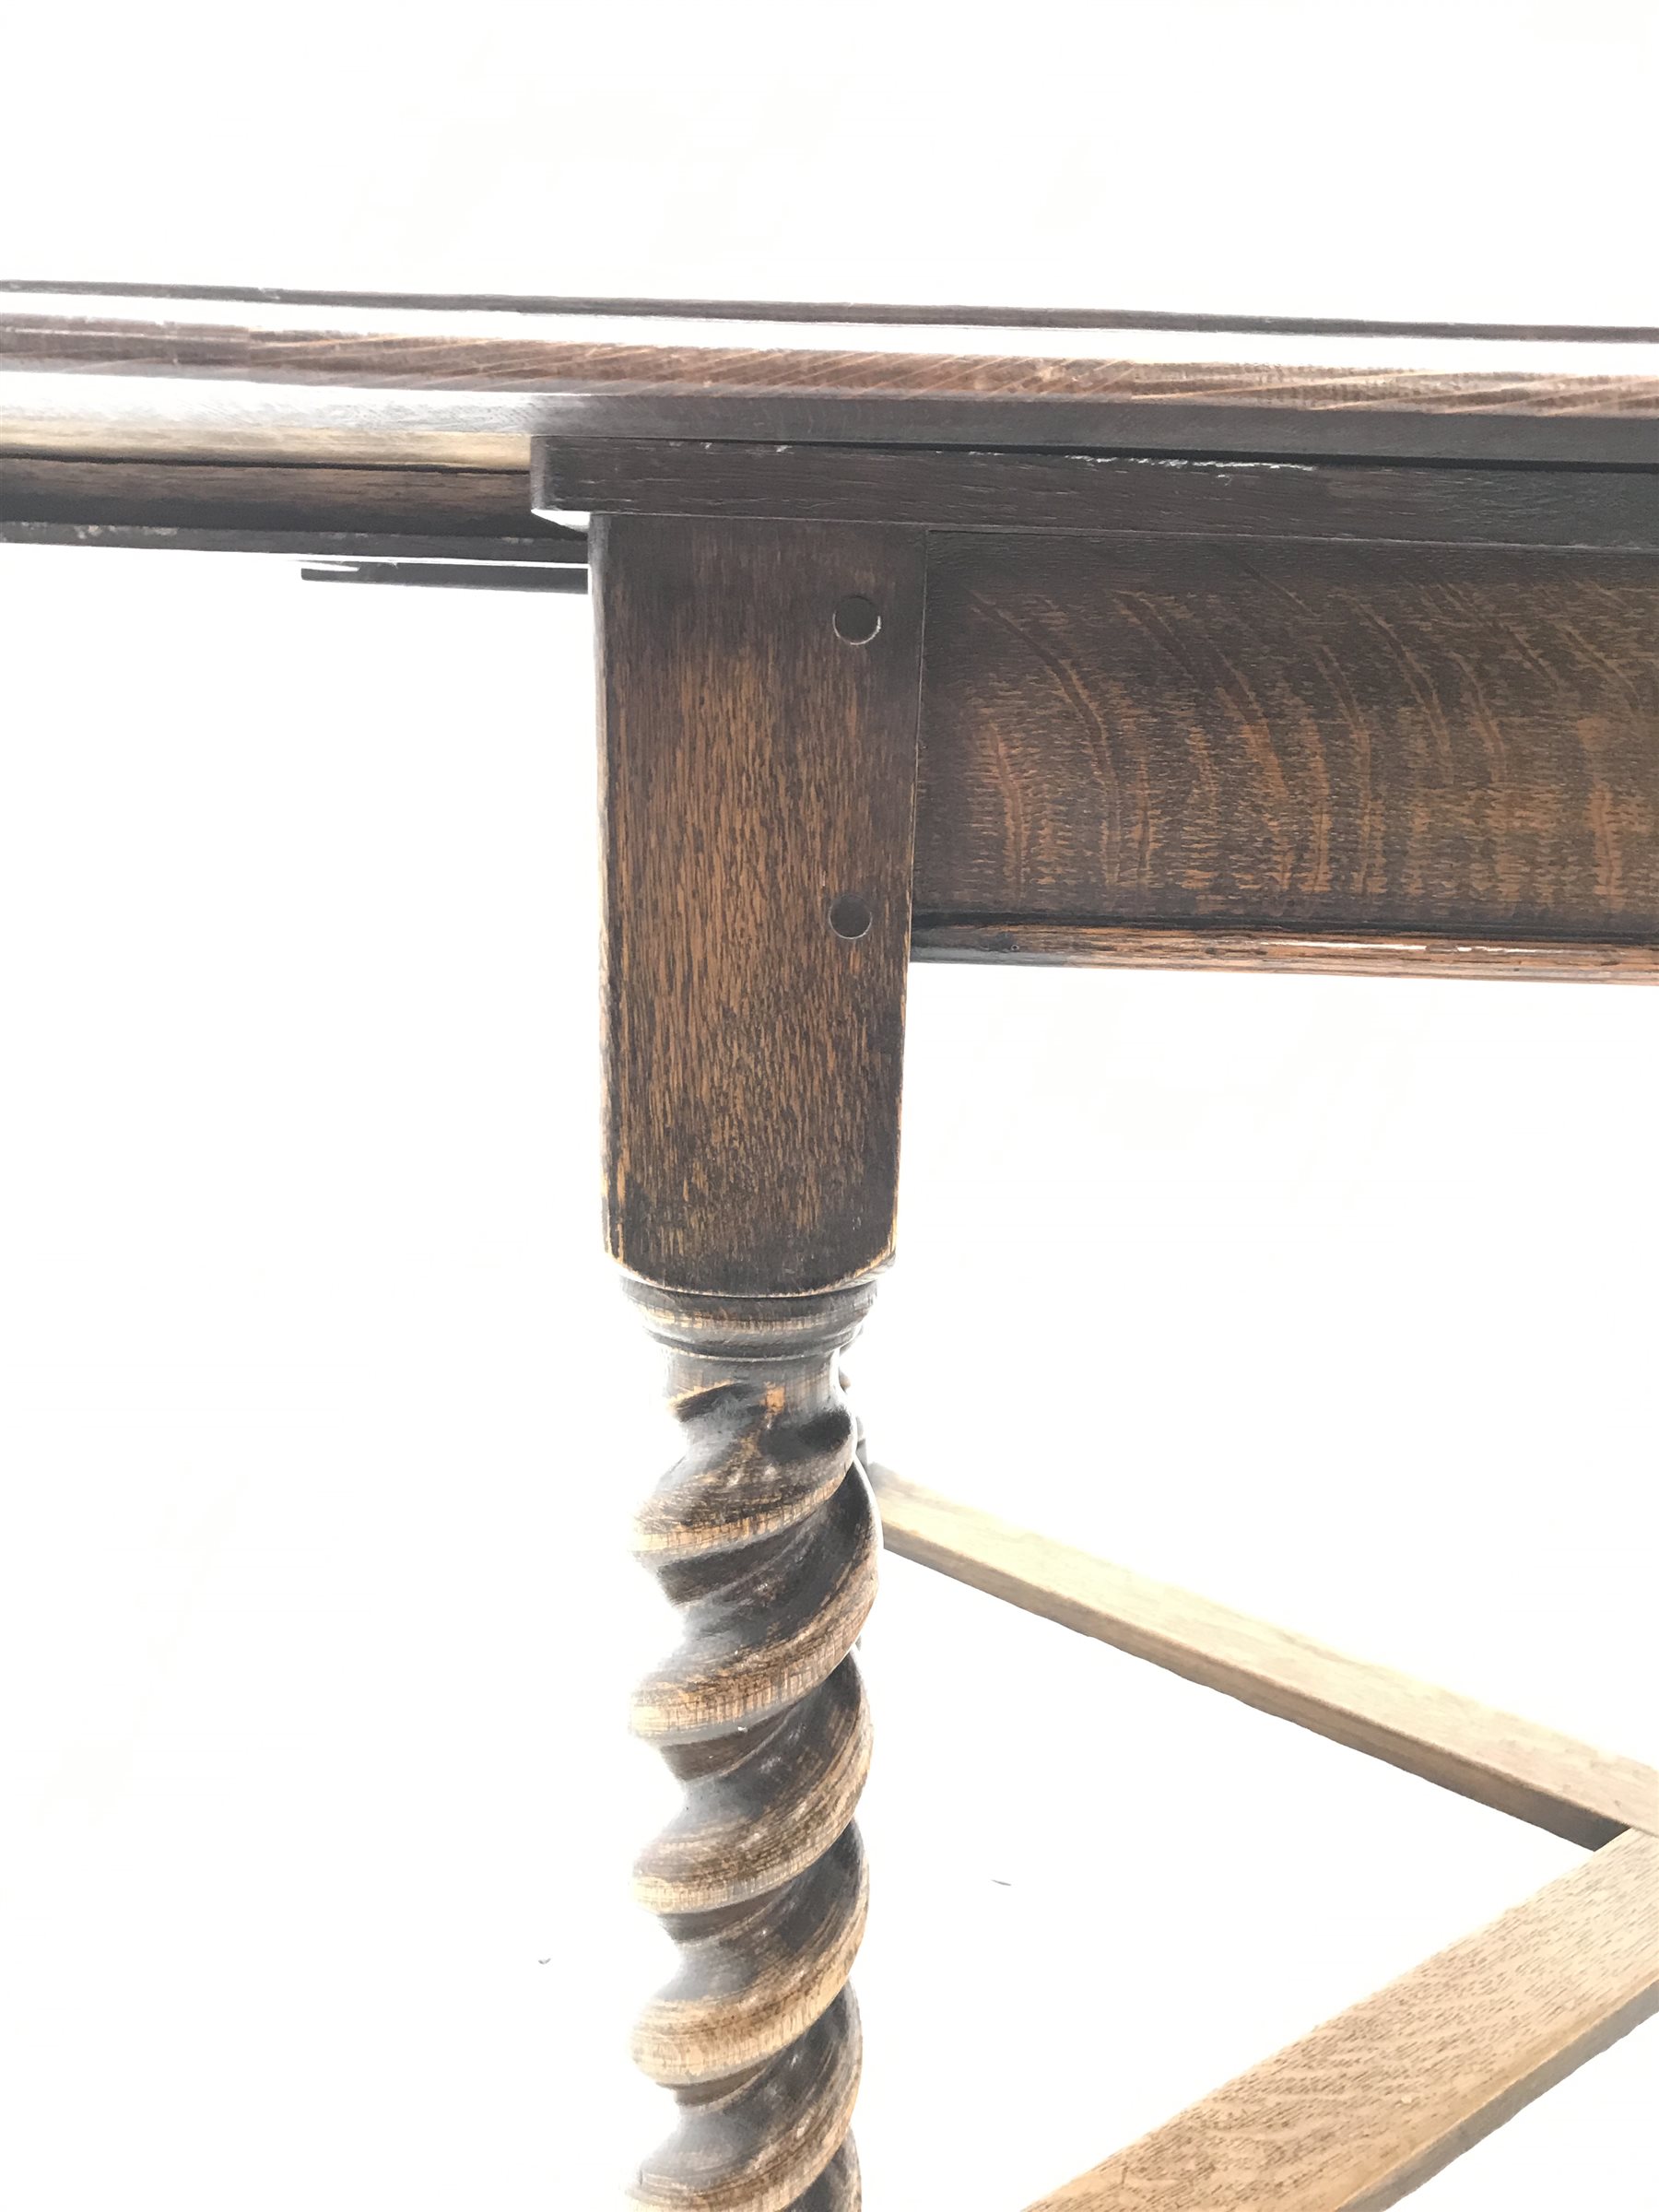 Early 20th century oak barley twist extending dining table with leaf, X shaped stretcher, curved end - Image 4 of 4